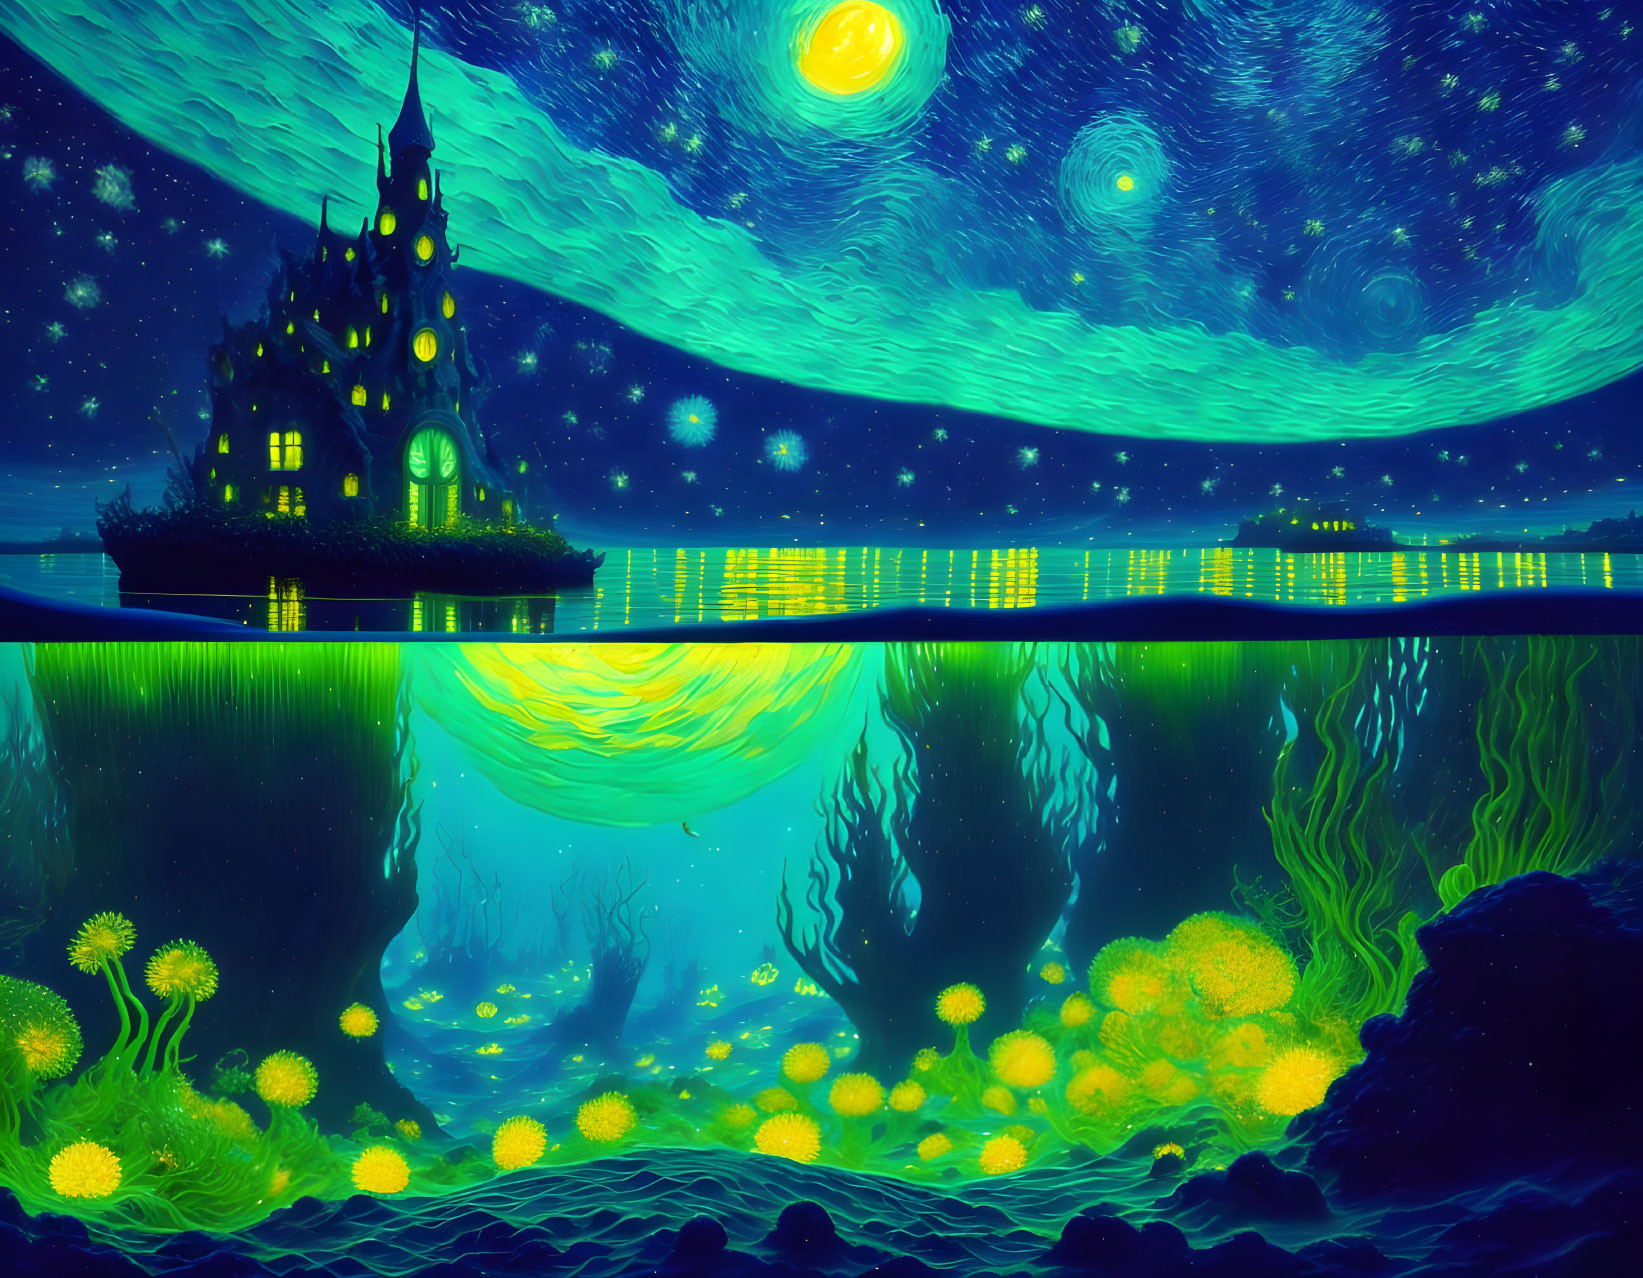 Vibrant digital art: Castle on island with water reflection and underwater flora.